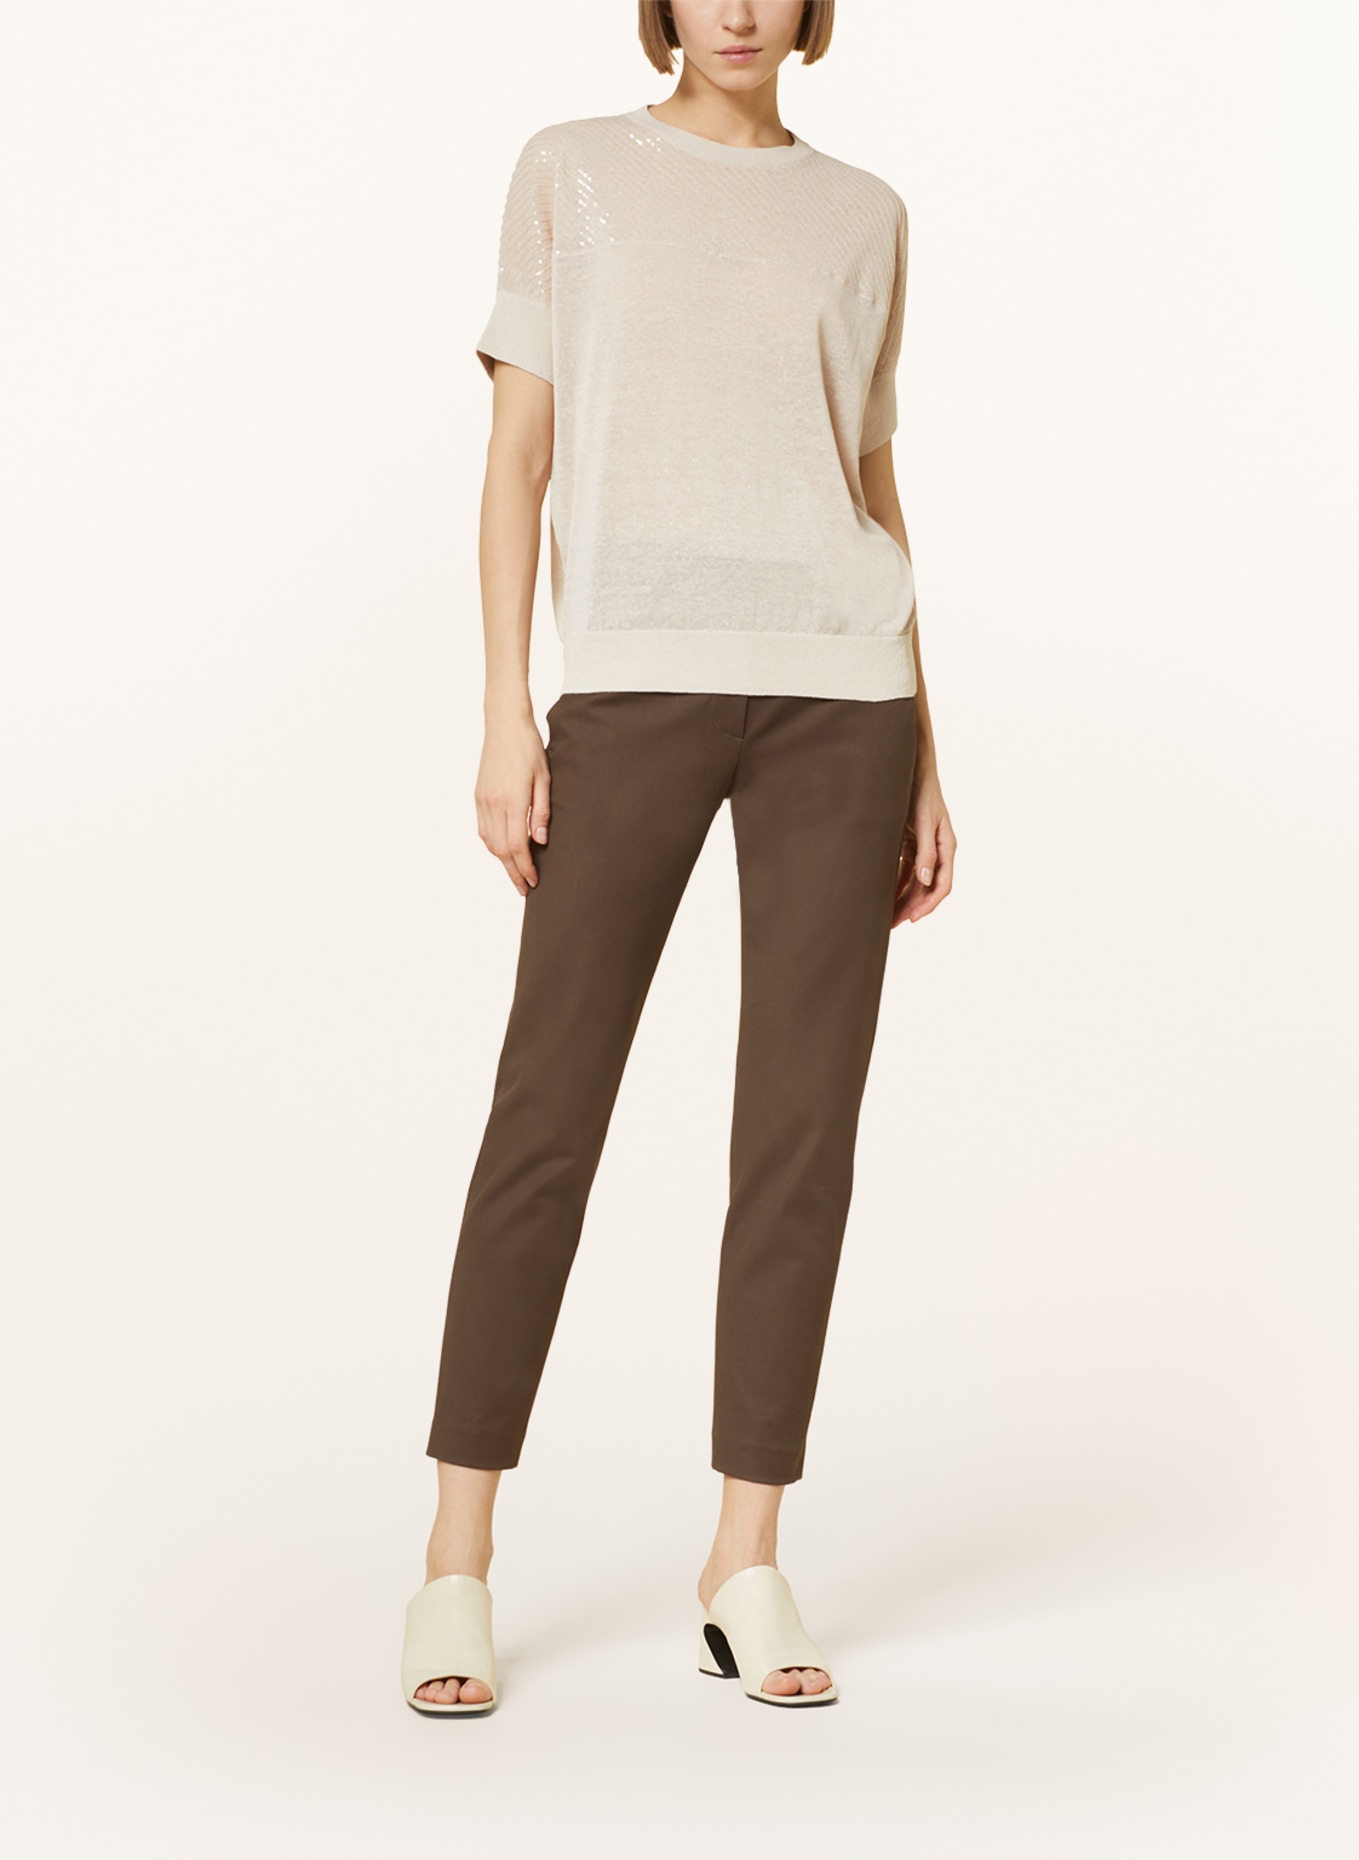 BRUNELLO CUCINELLI Knit shirt made of linen with sequins, Color: CREAM (Image 2)